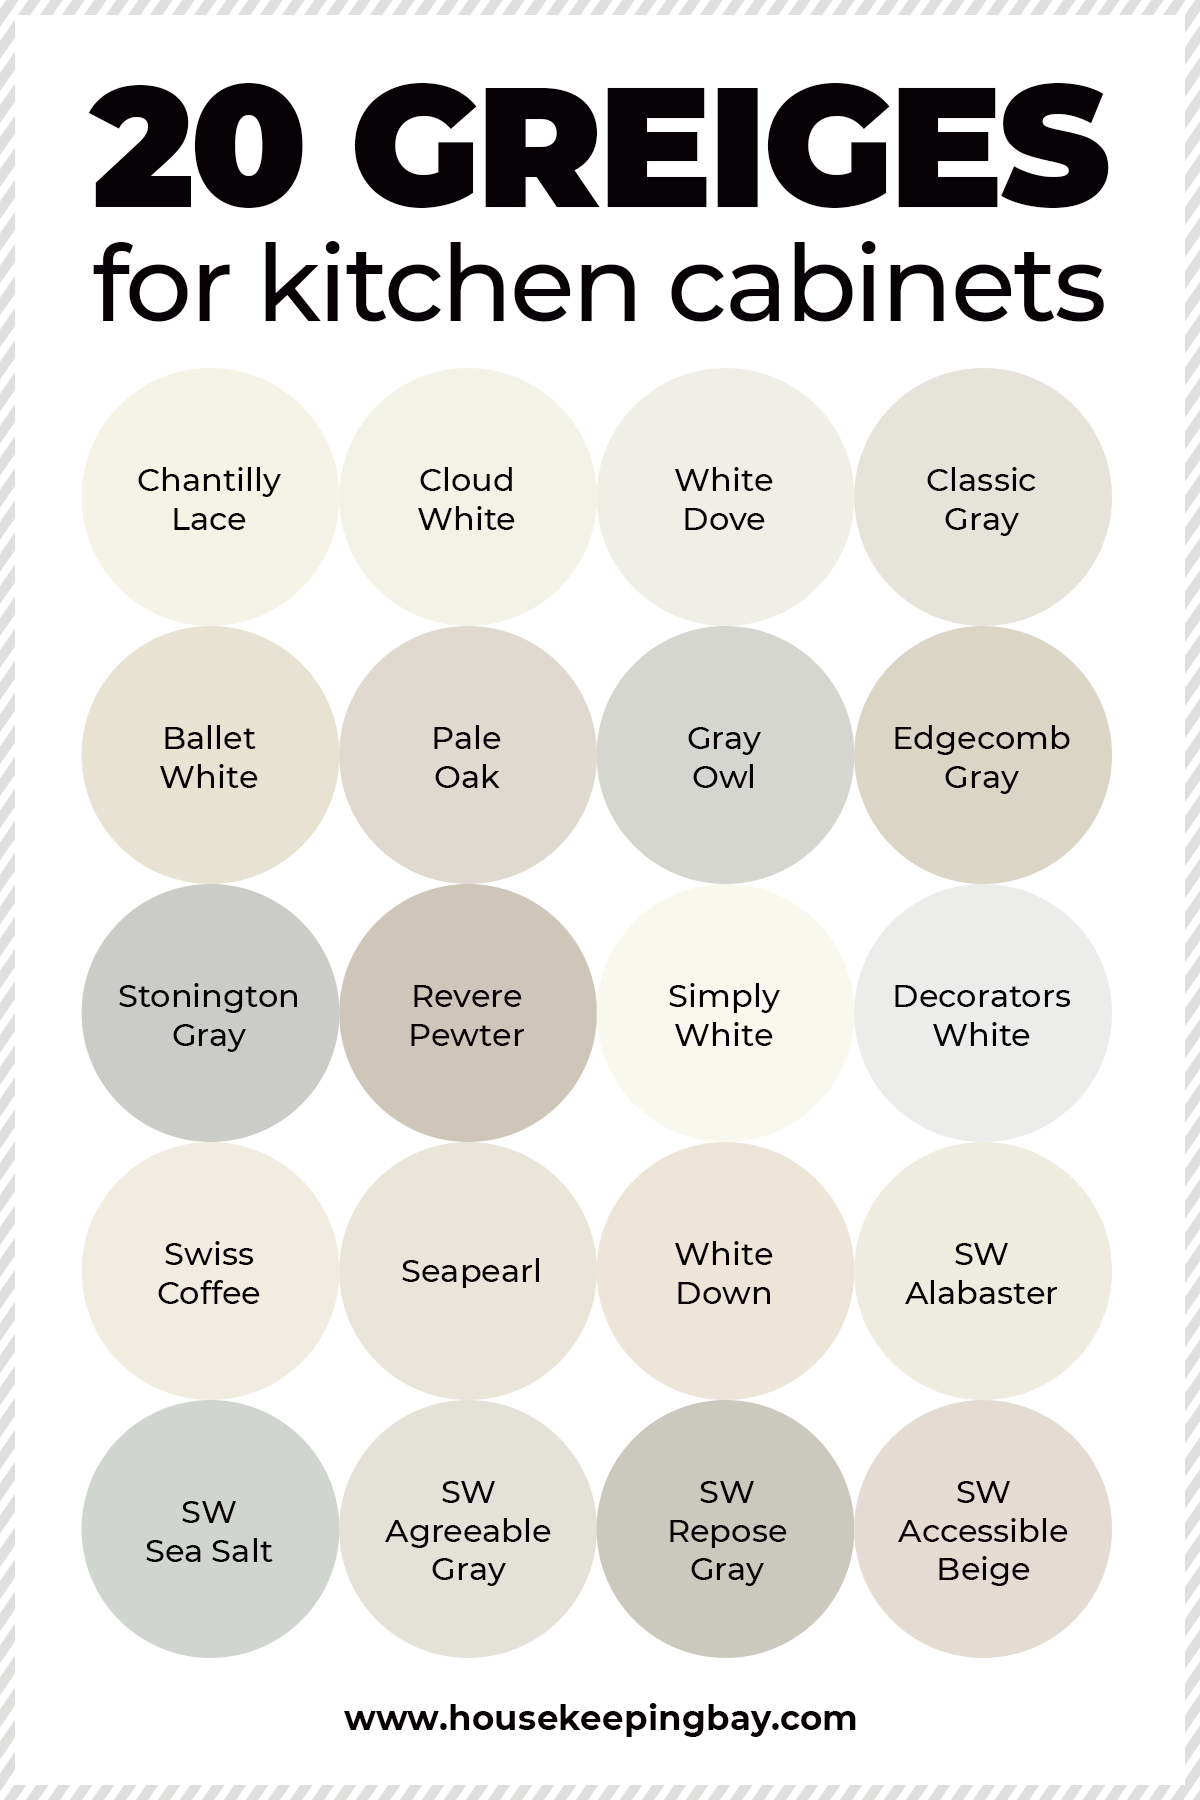 20 greiges for kitchen cabinets